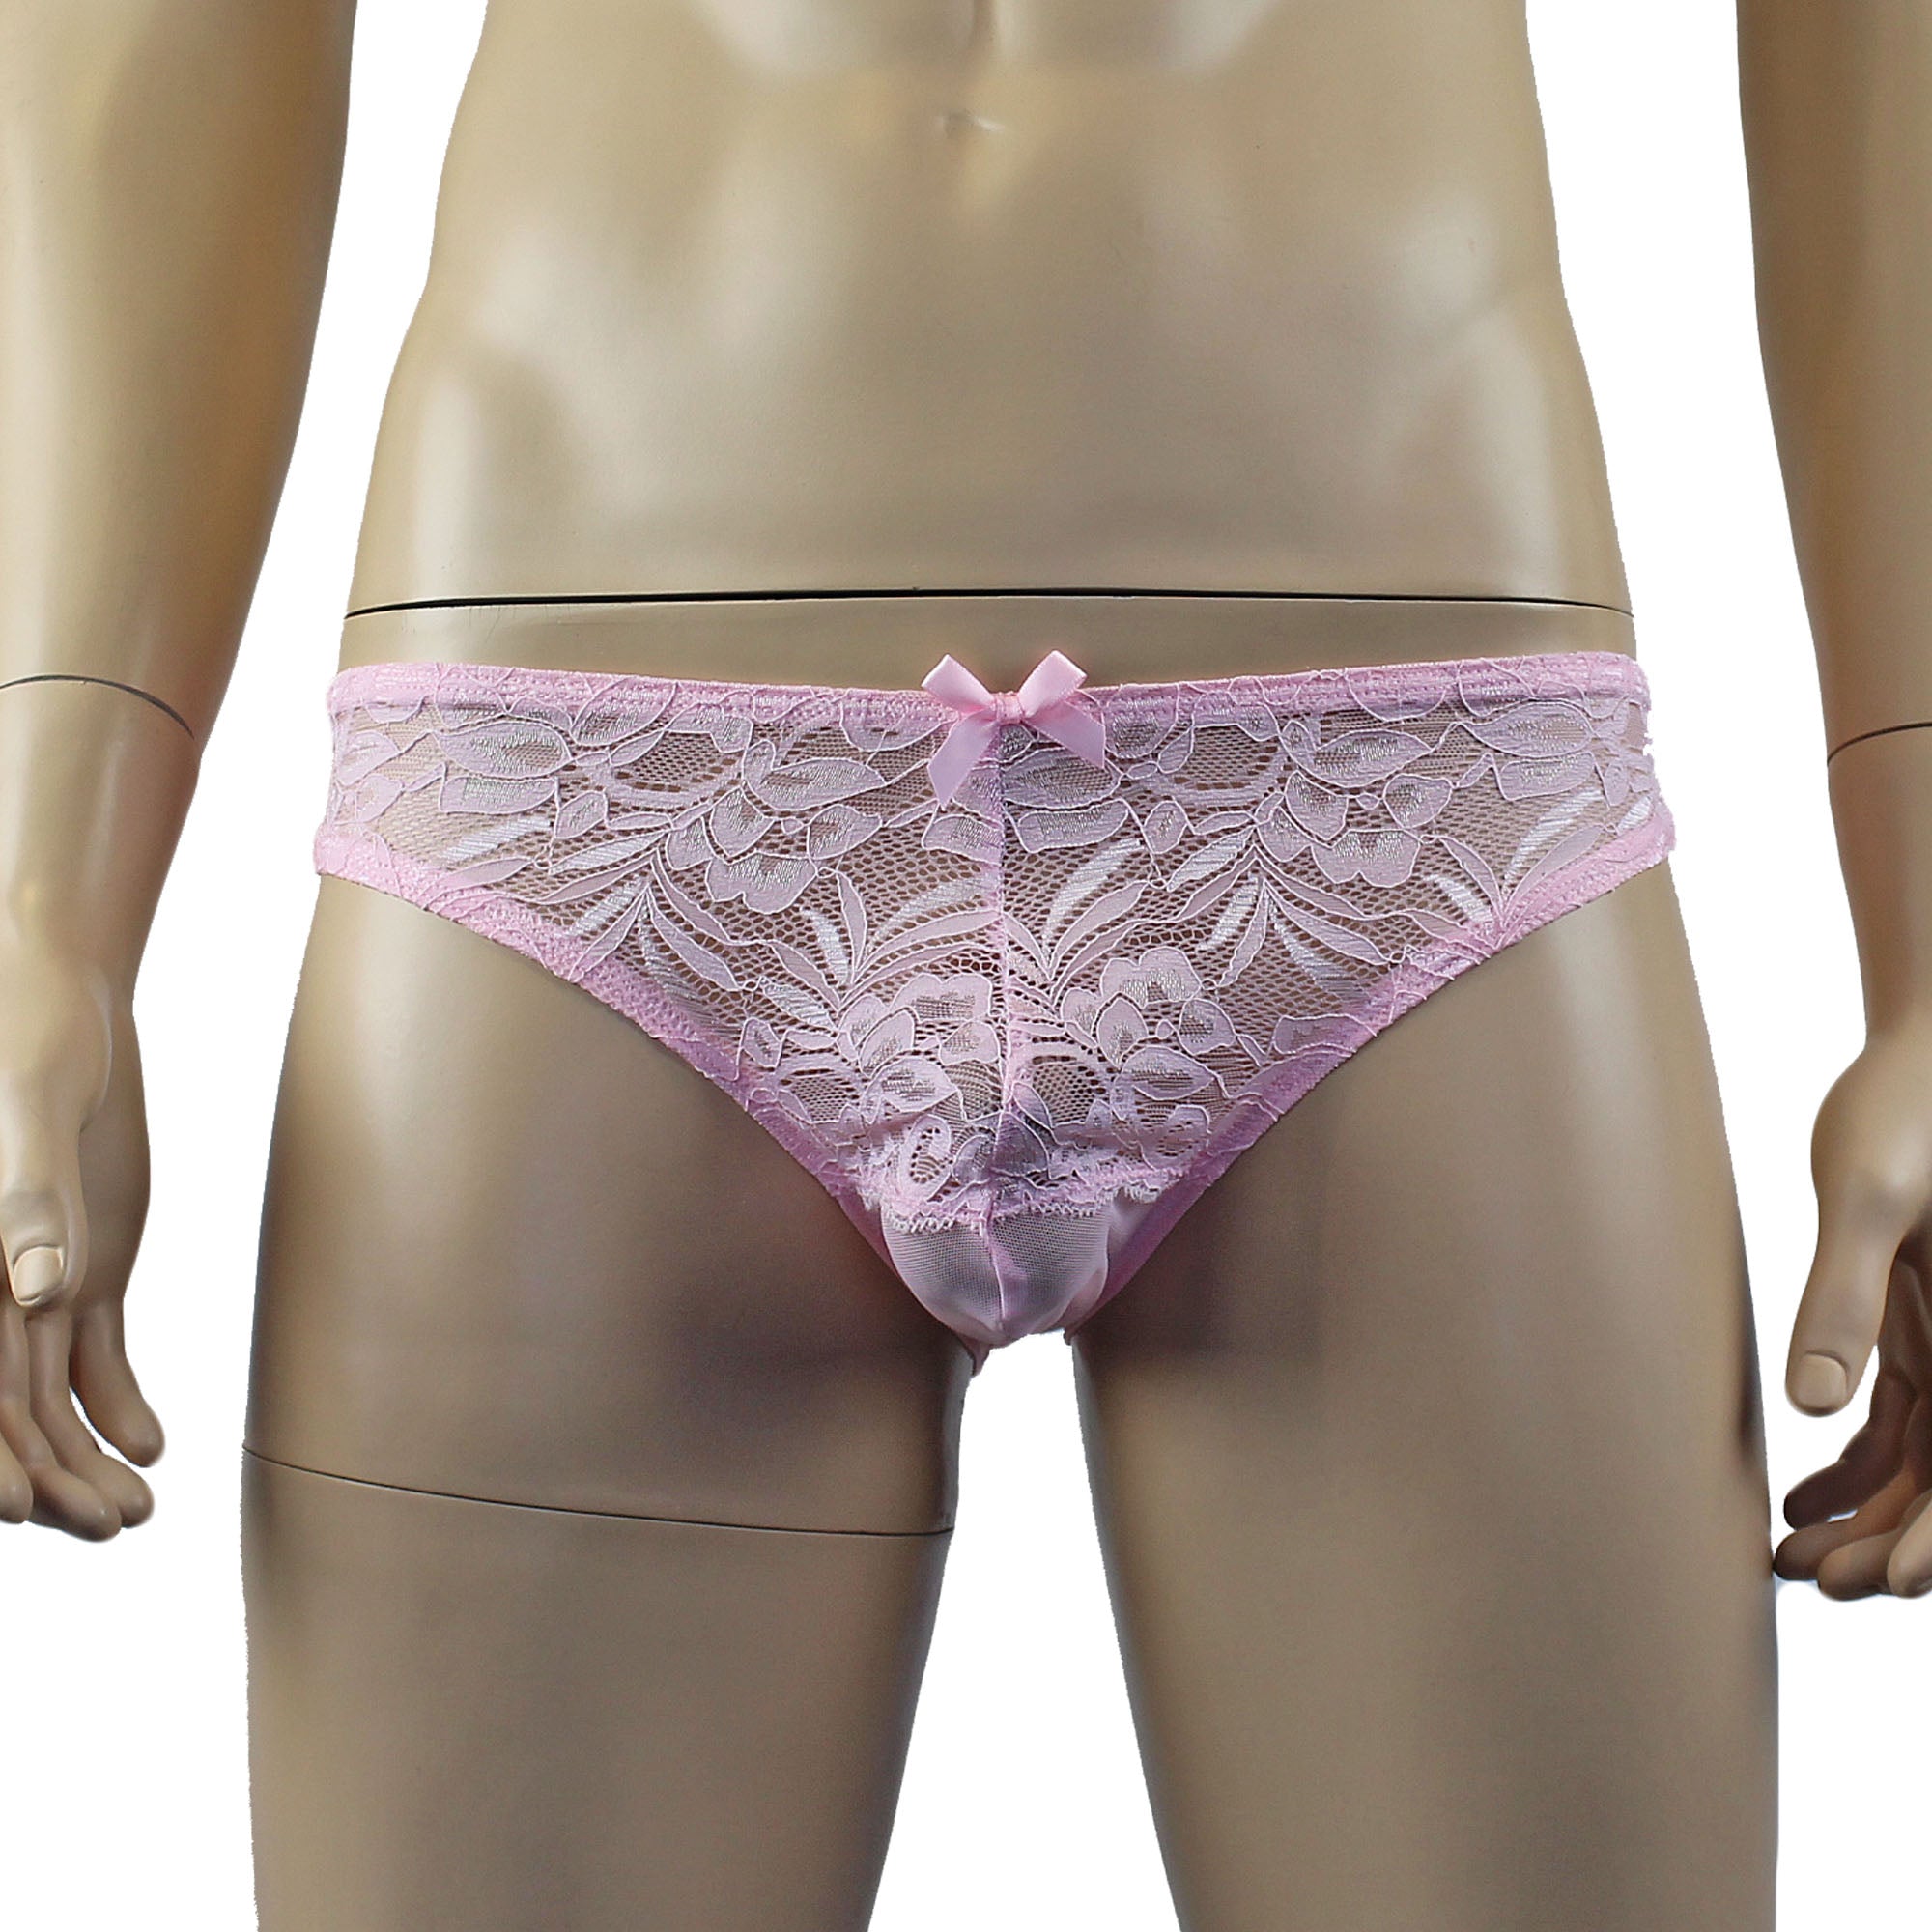 Mens Kristy Sexy Lace Bikini Brief Panties with See through Back Light Pink